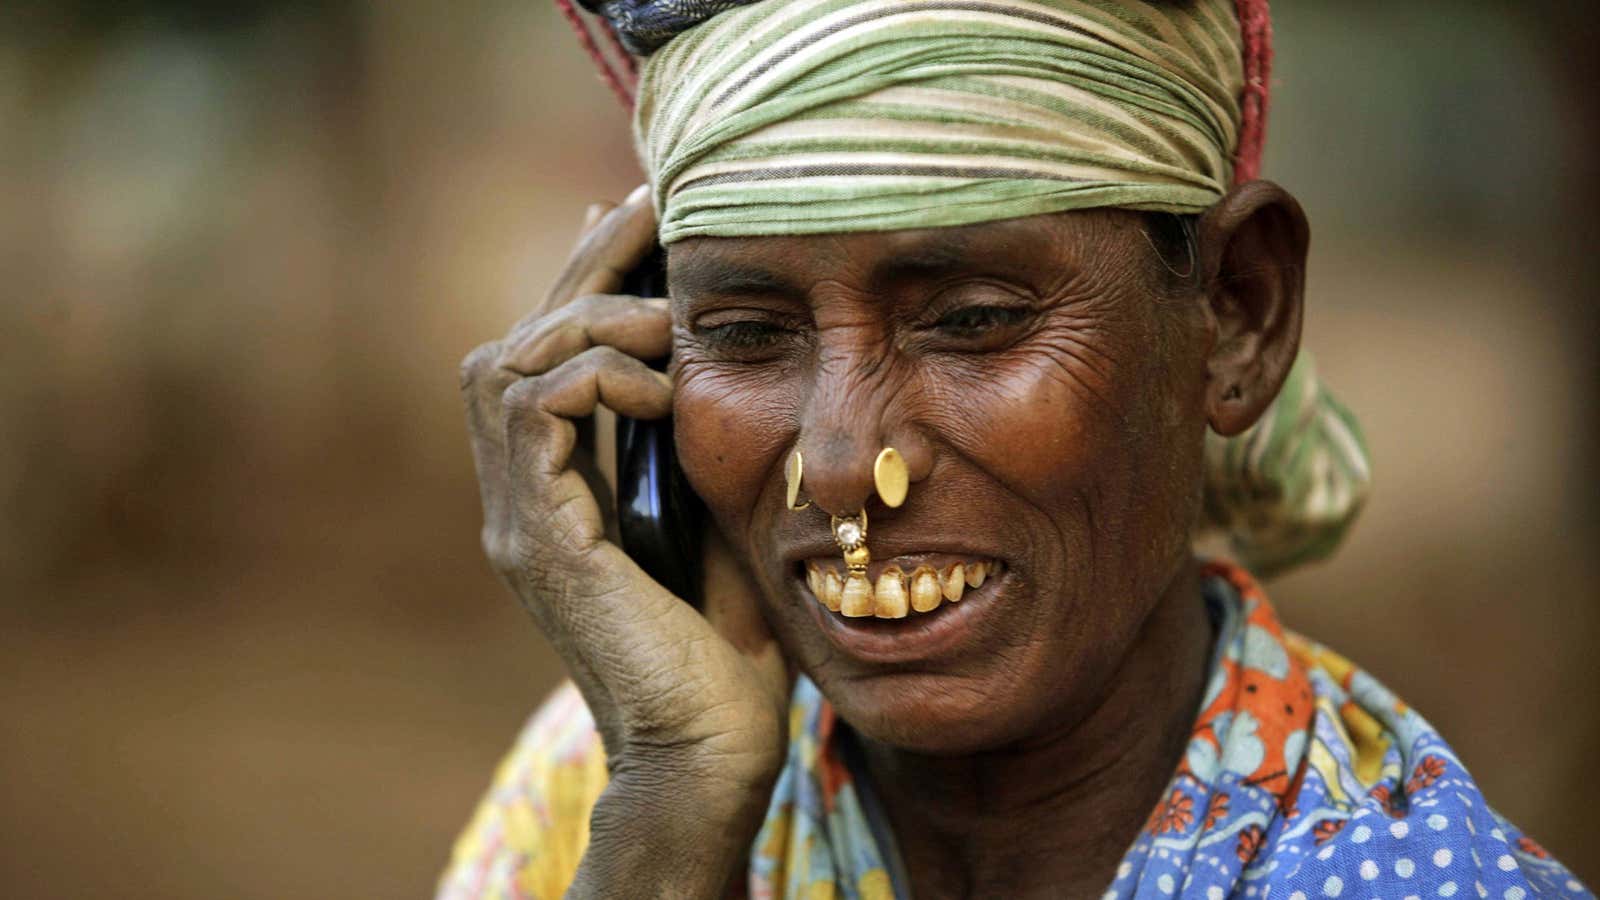 One of the six billion people on earth with a mobile phone. Far fewer have access to clean toilets.